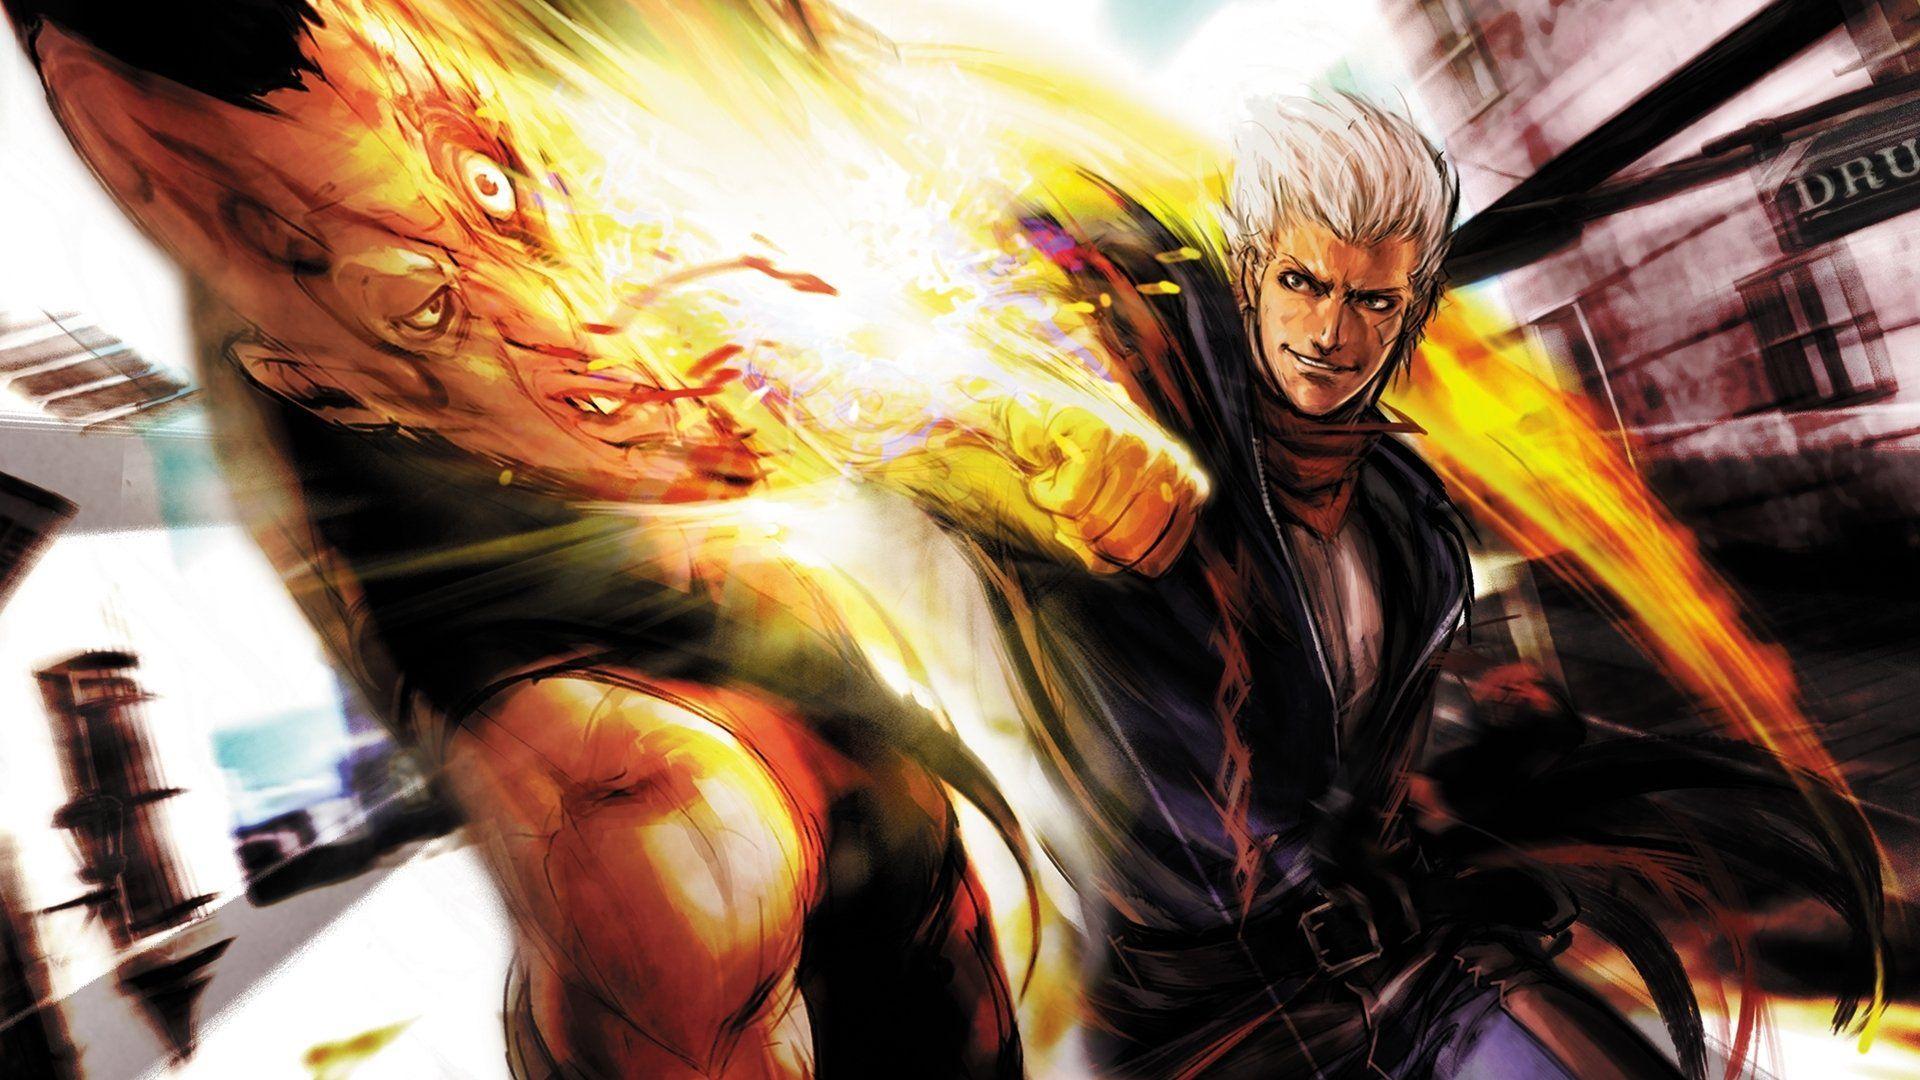 God hand ps2 for mac